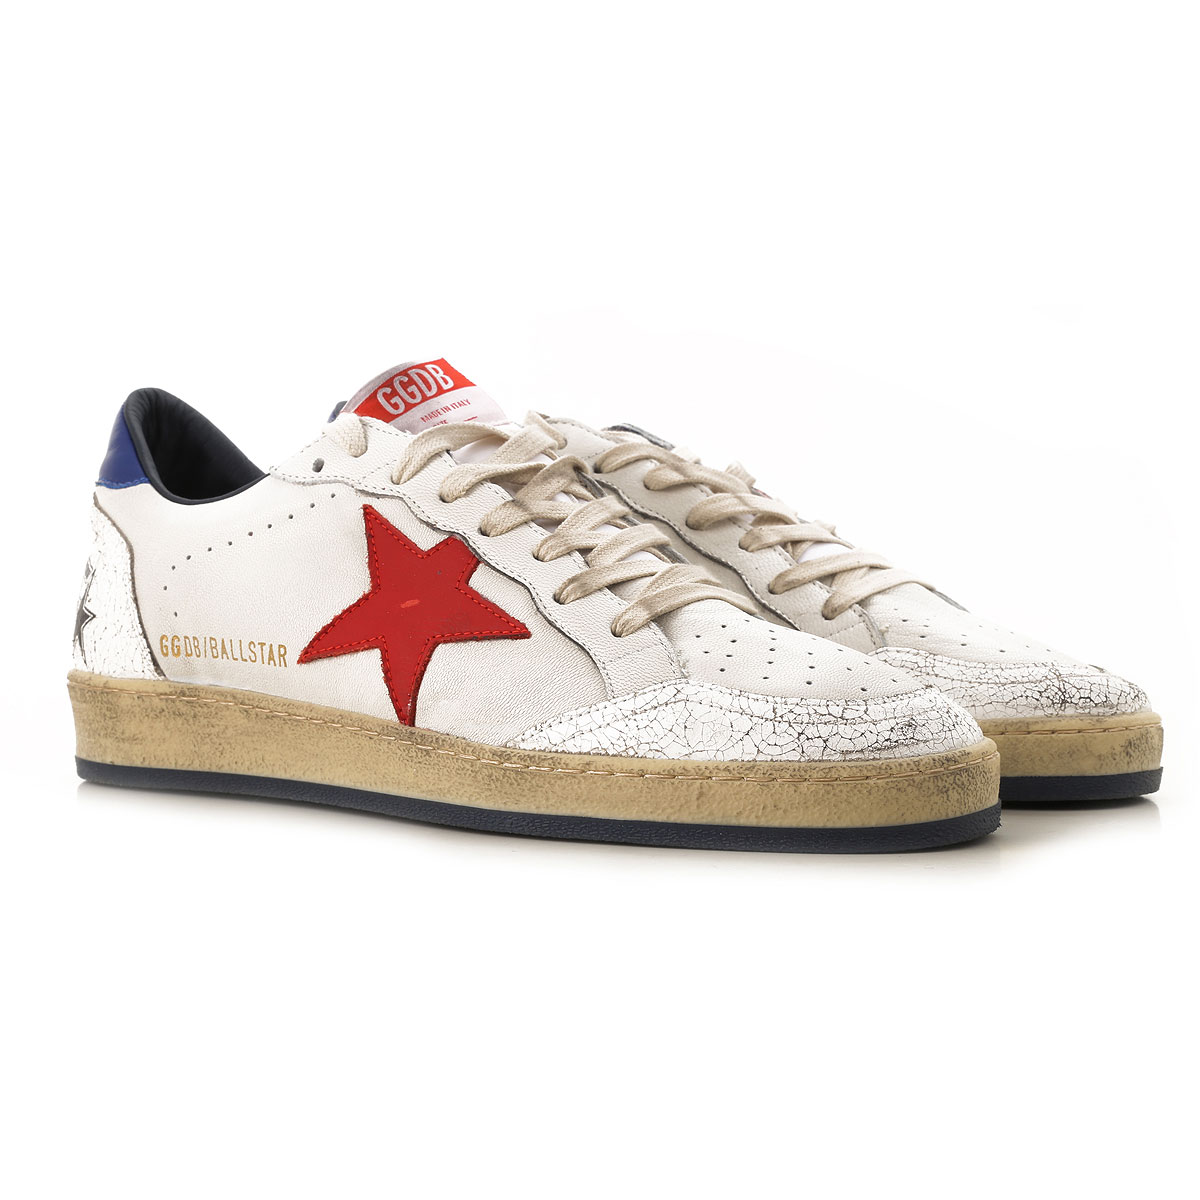 Mens Shoes Golden Goose, Style code: g33ms592-h8-